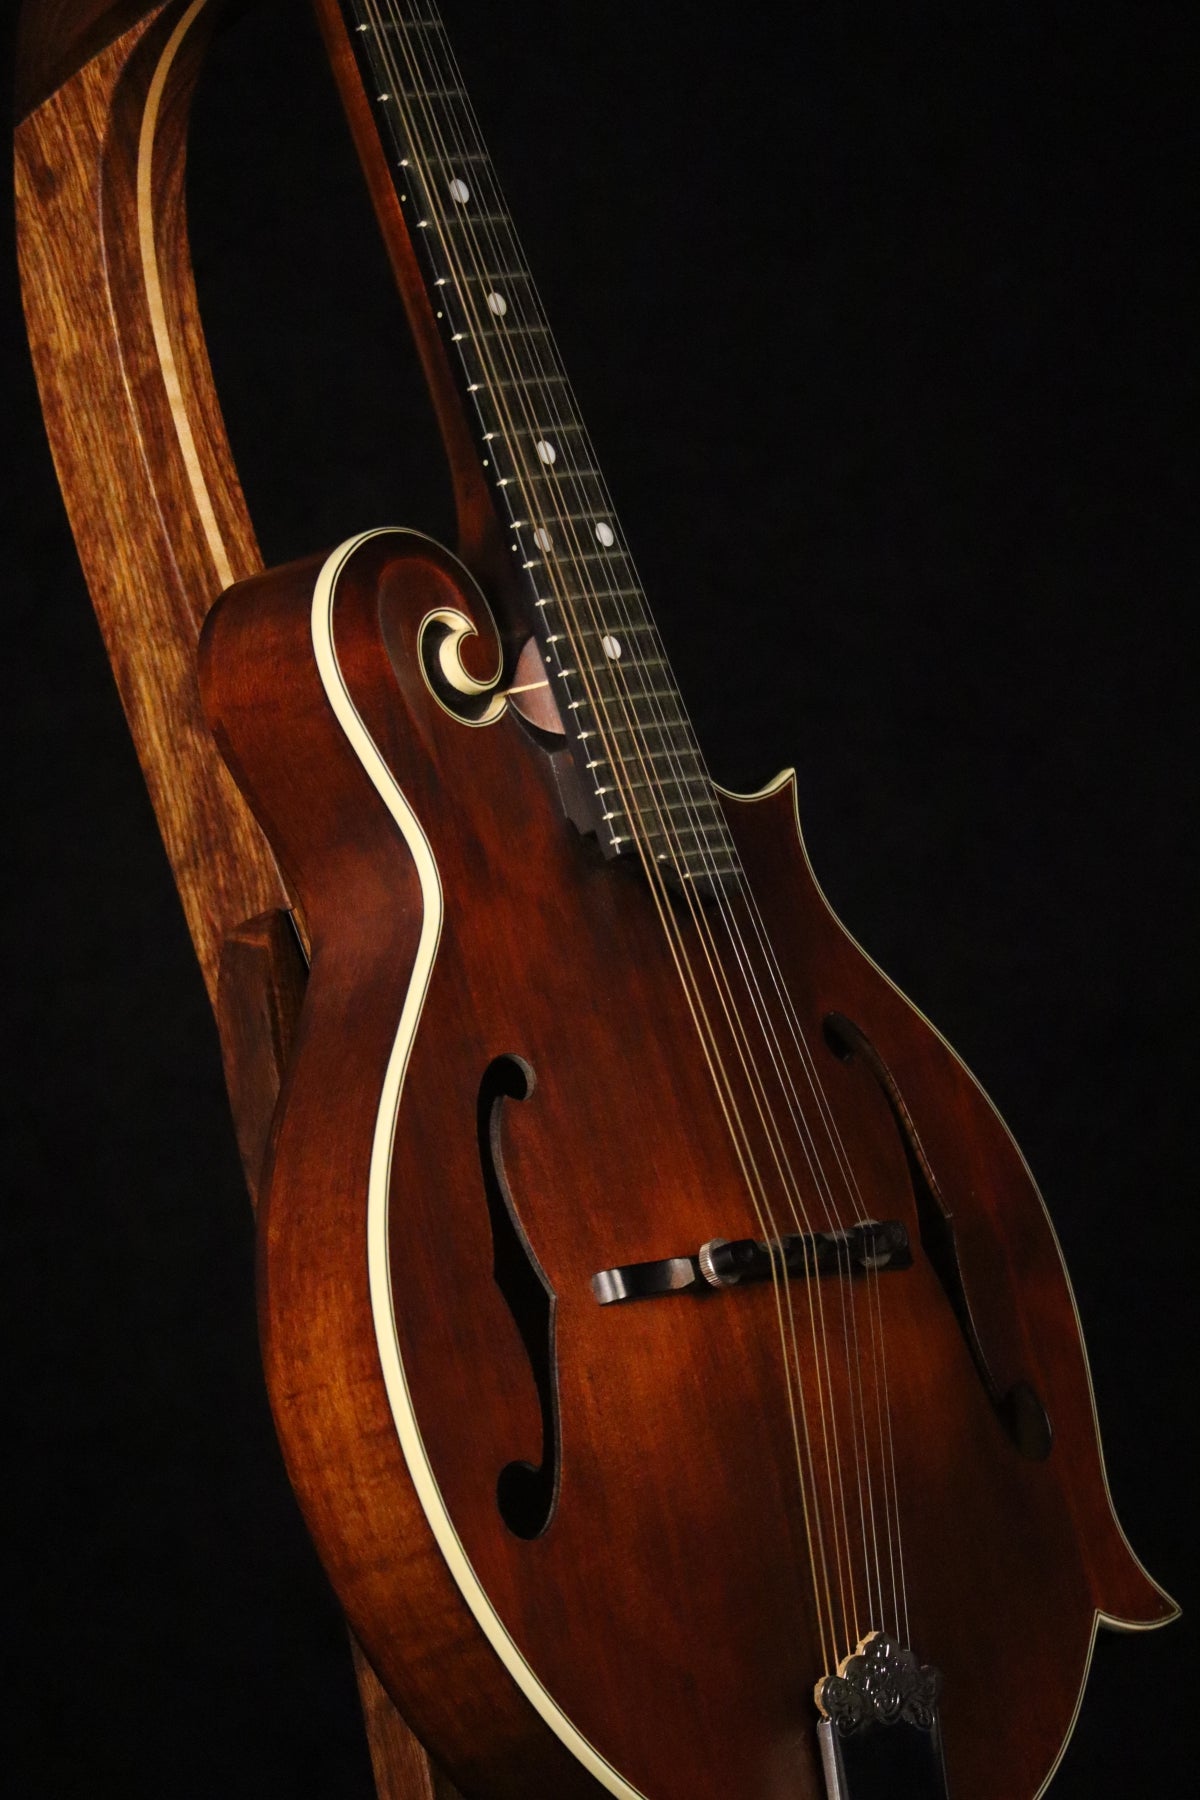 Folding chechen Caribbean rosewood and curly maple wood mandolin floor stand closeup front image with Eastman mandolin